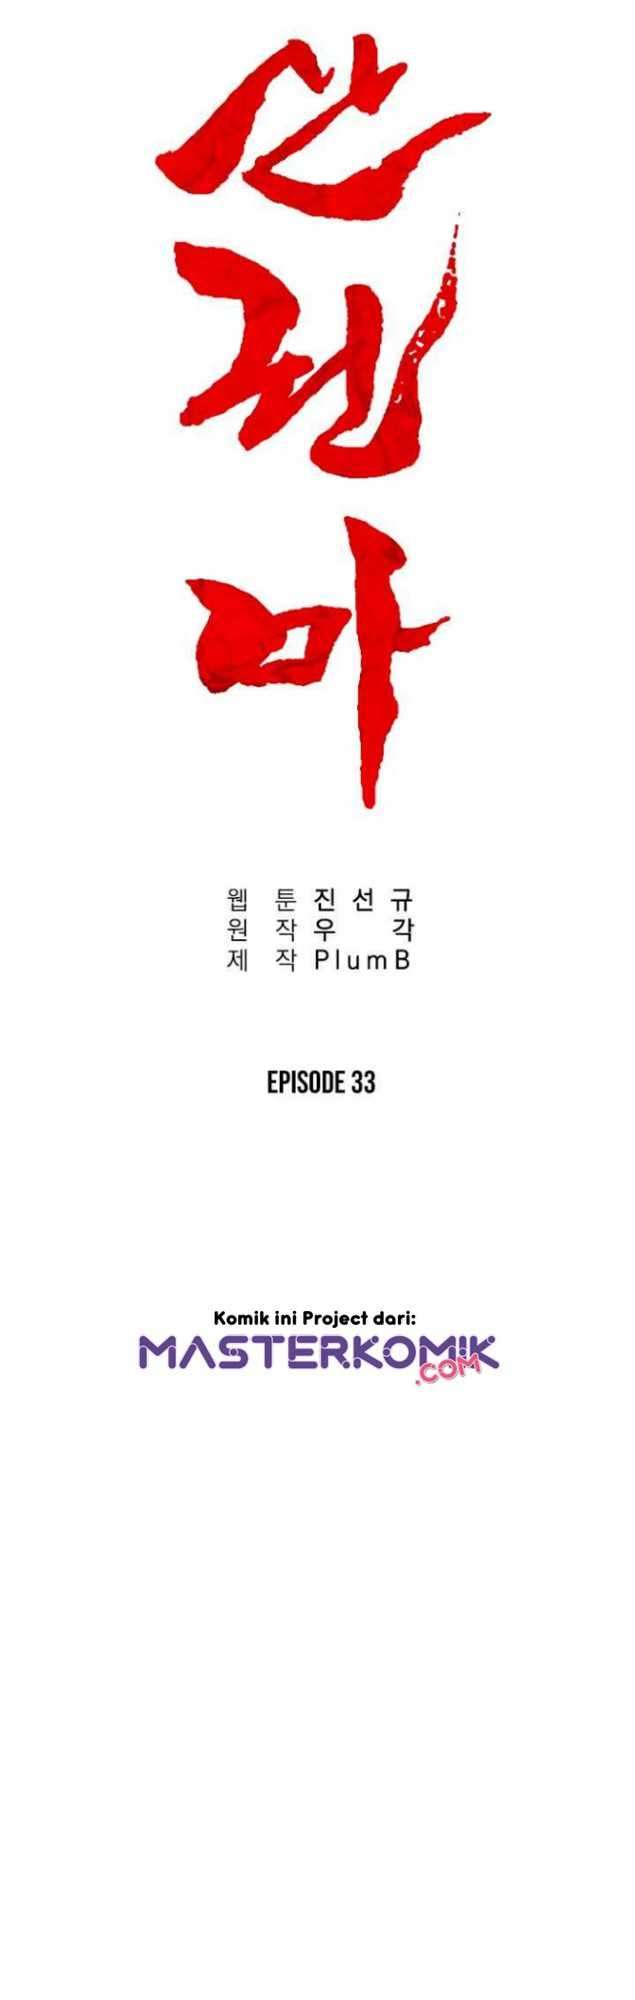 Fist Demon Of Mount Hua Chapter 33